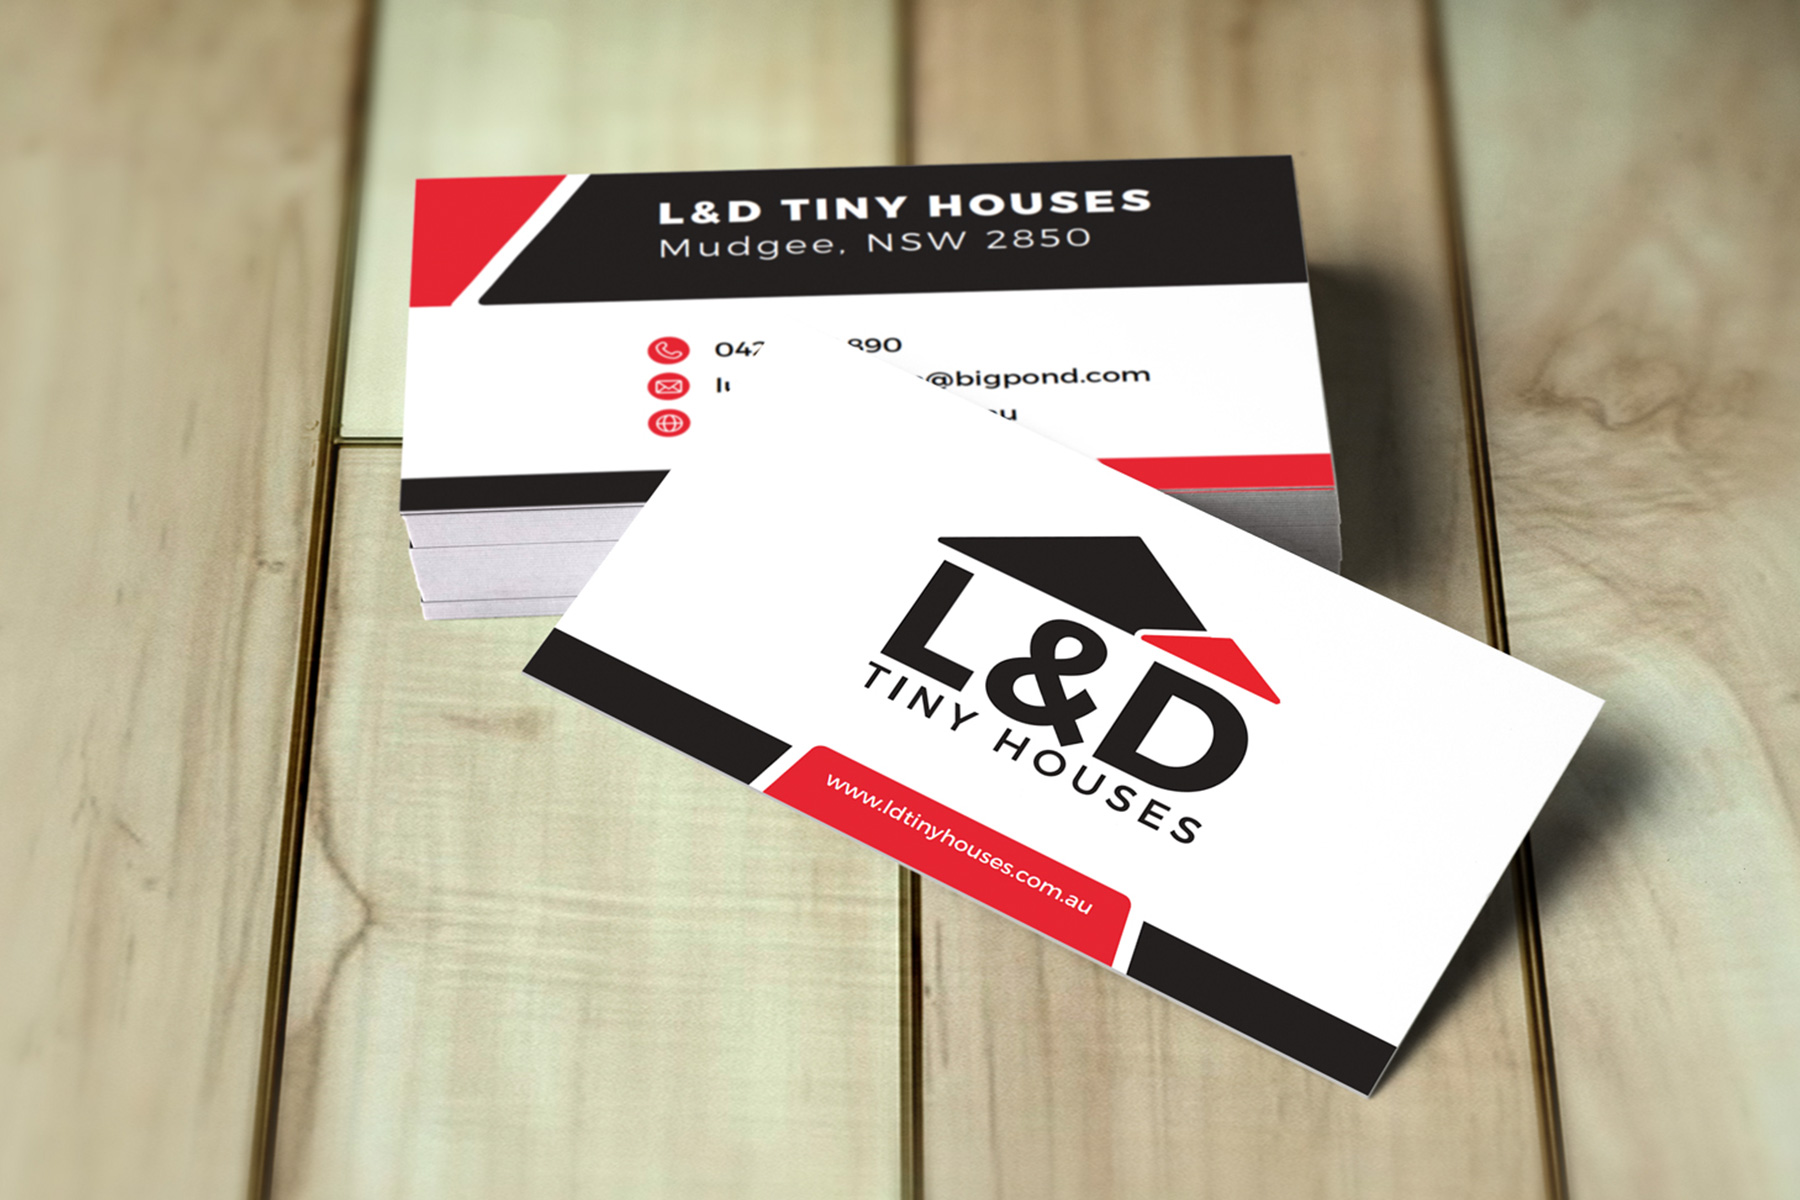 L&D Tiny Houses business cards on a wooden floor